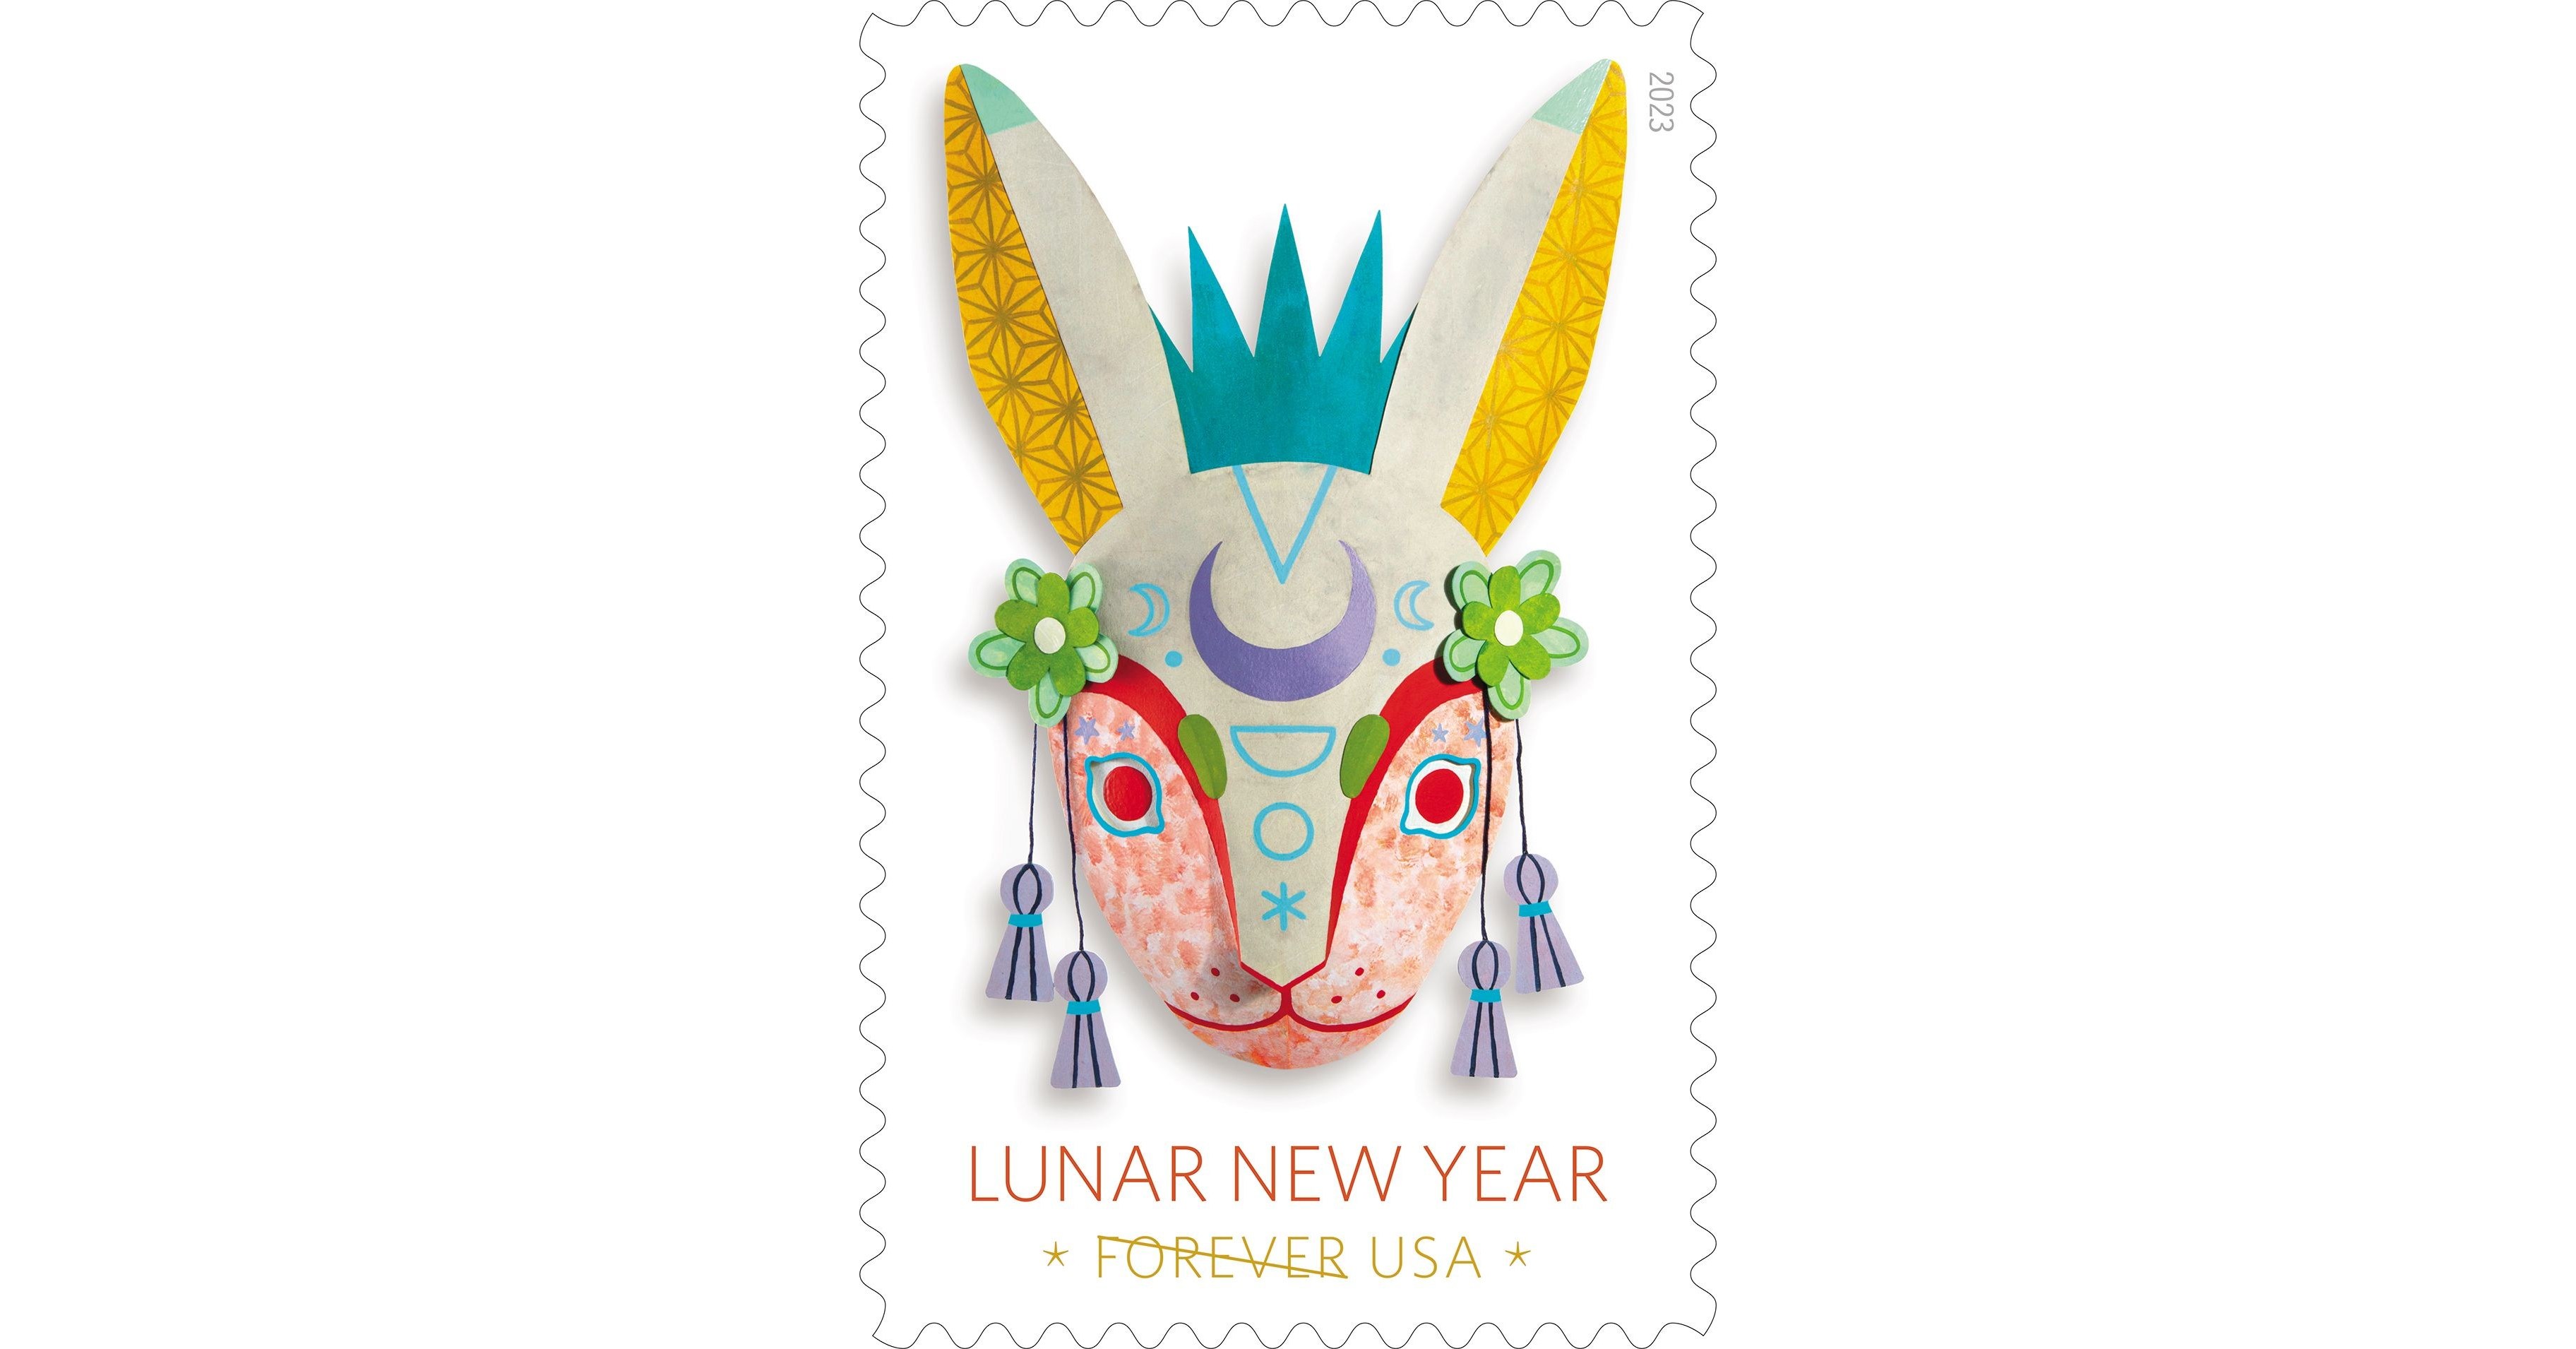 USPS Gets Festive With a Lunar New Year Stamp Stamp will be unveiled